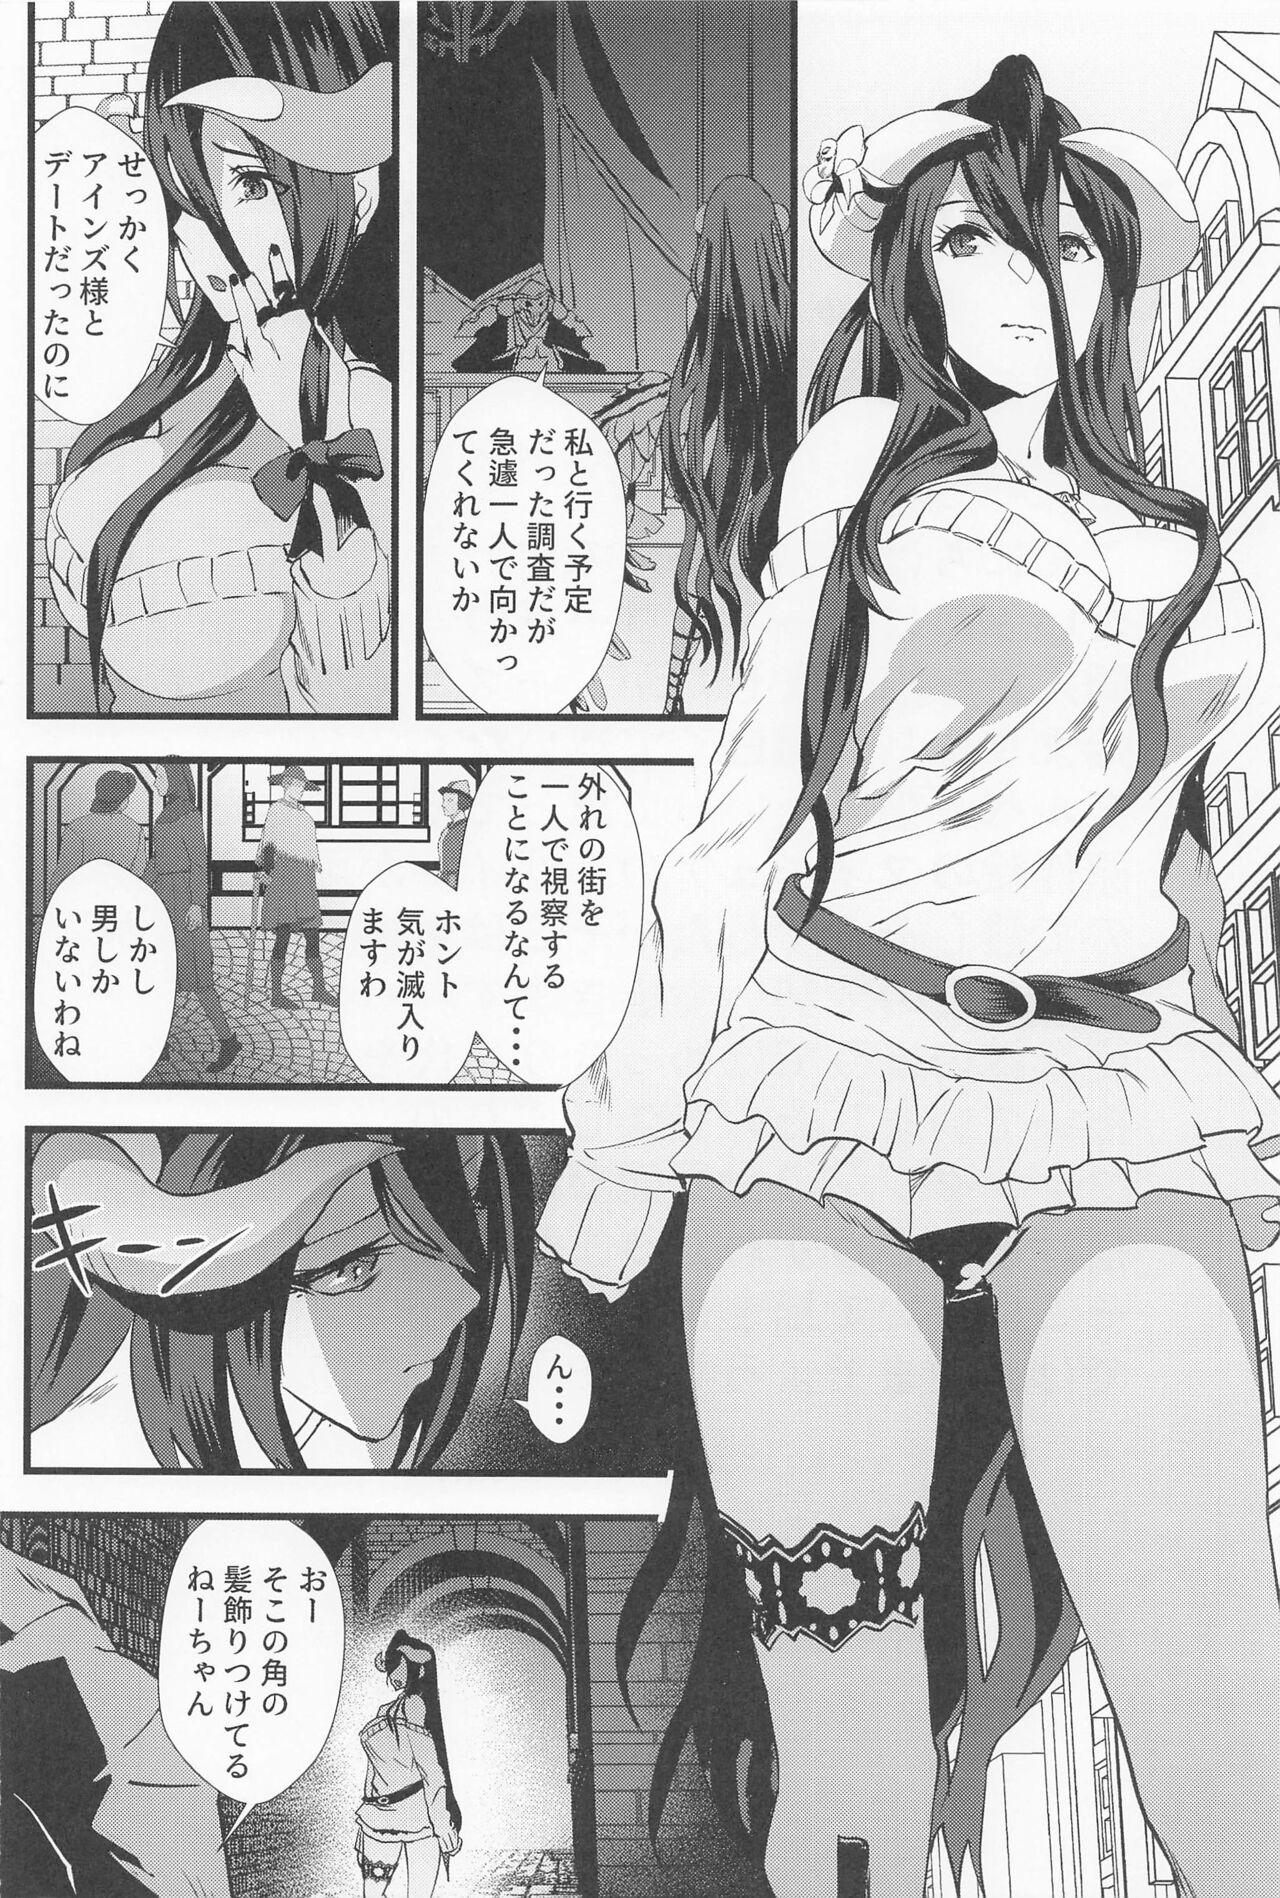 Dancing Inran Succubus Albedo - Overlord Picked Up - Page 3